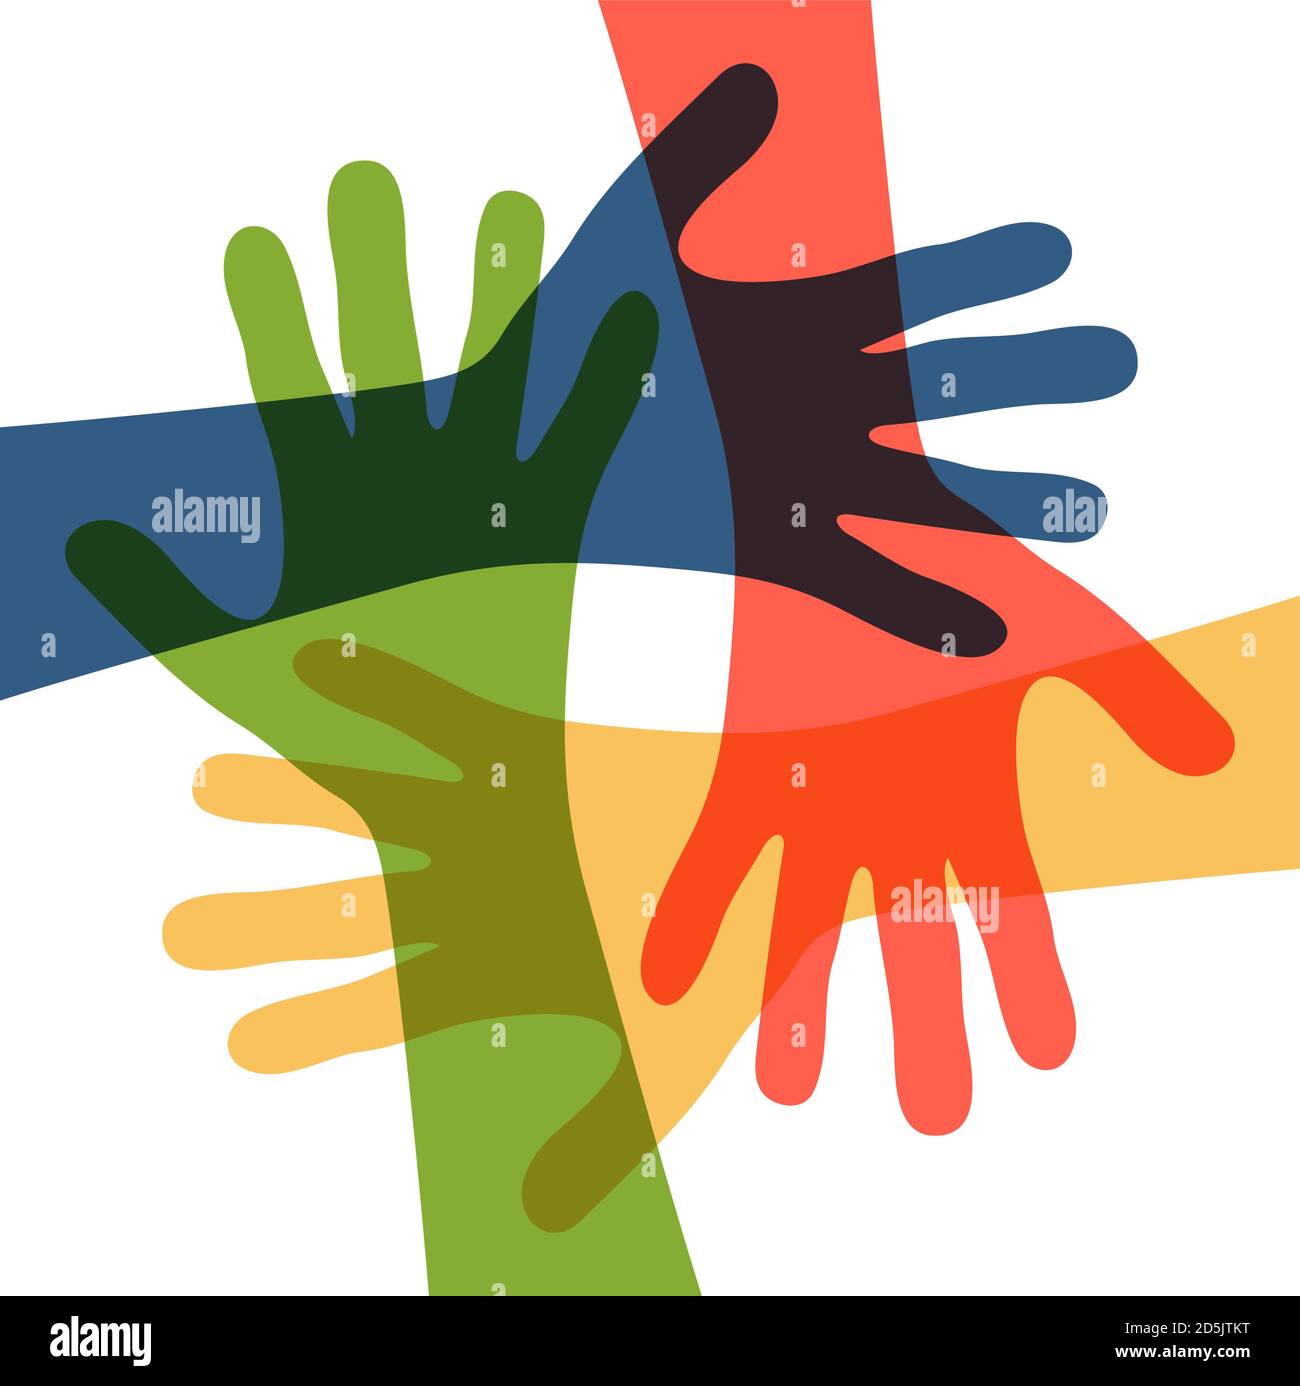 EPS 10 vector illustration of four different colored people stretch out their hands symbolizing cooperation or diversity friendship Stock Vector